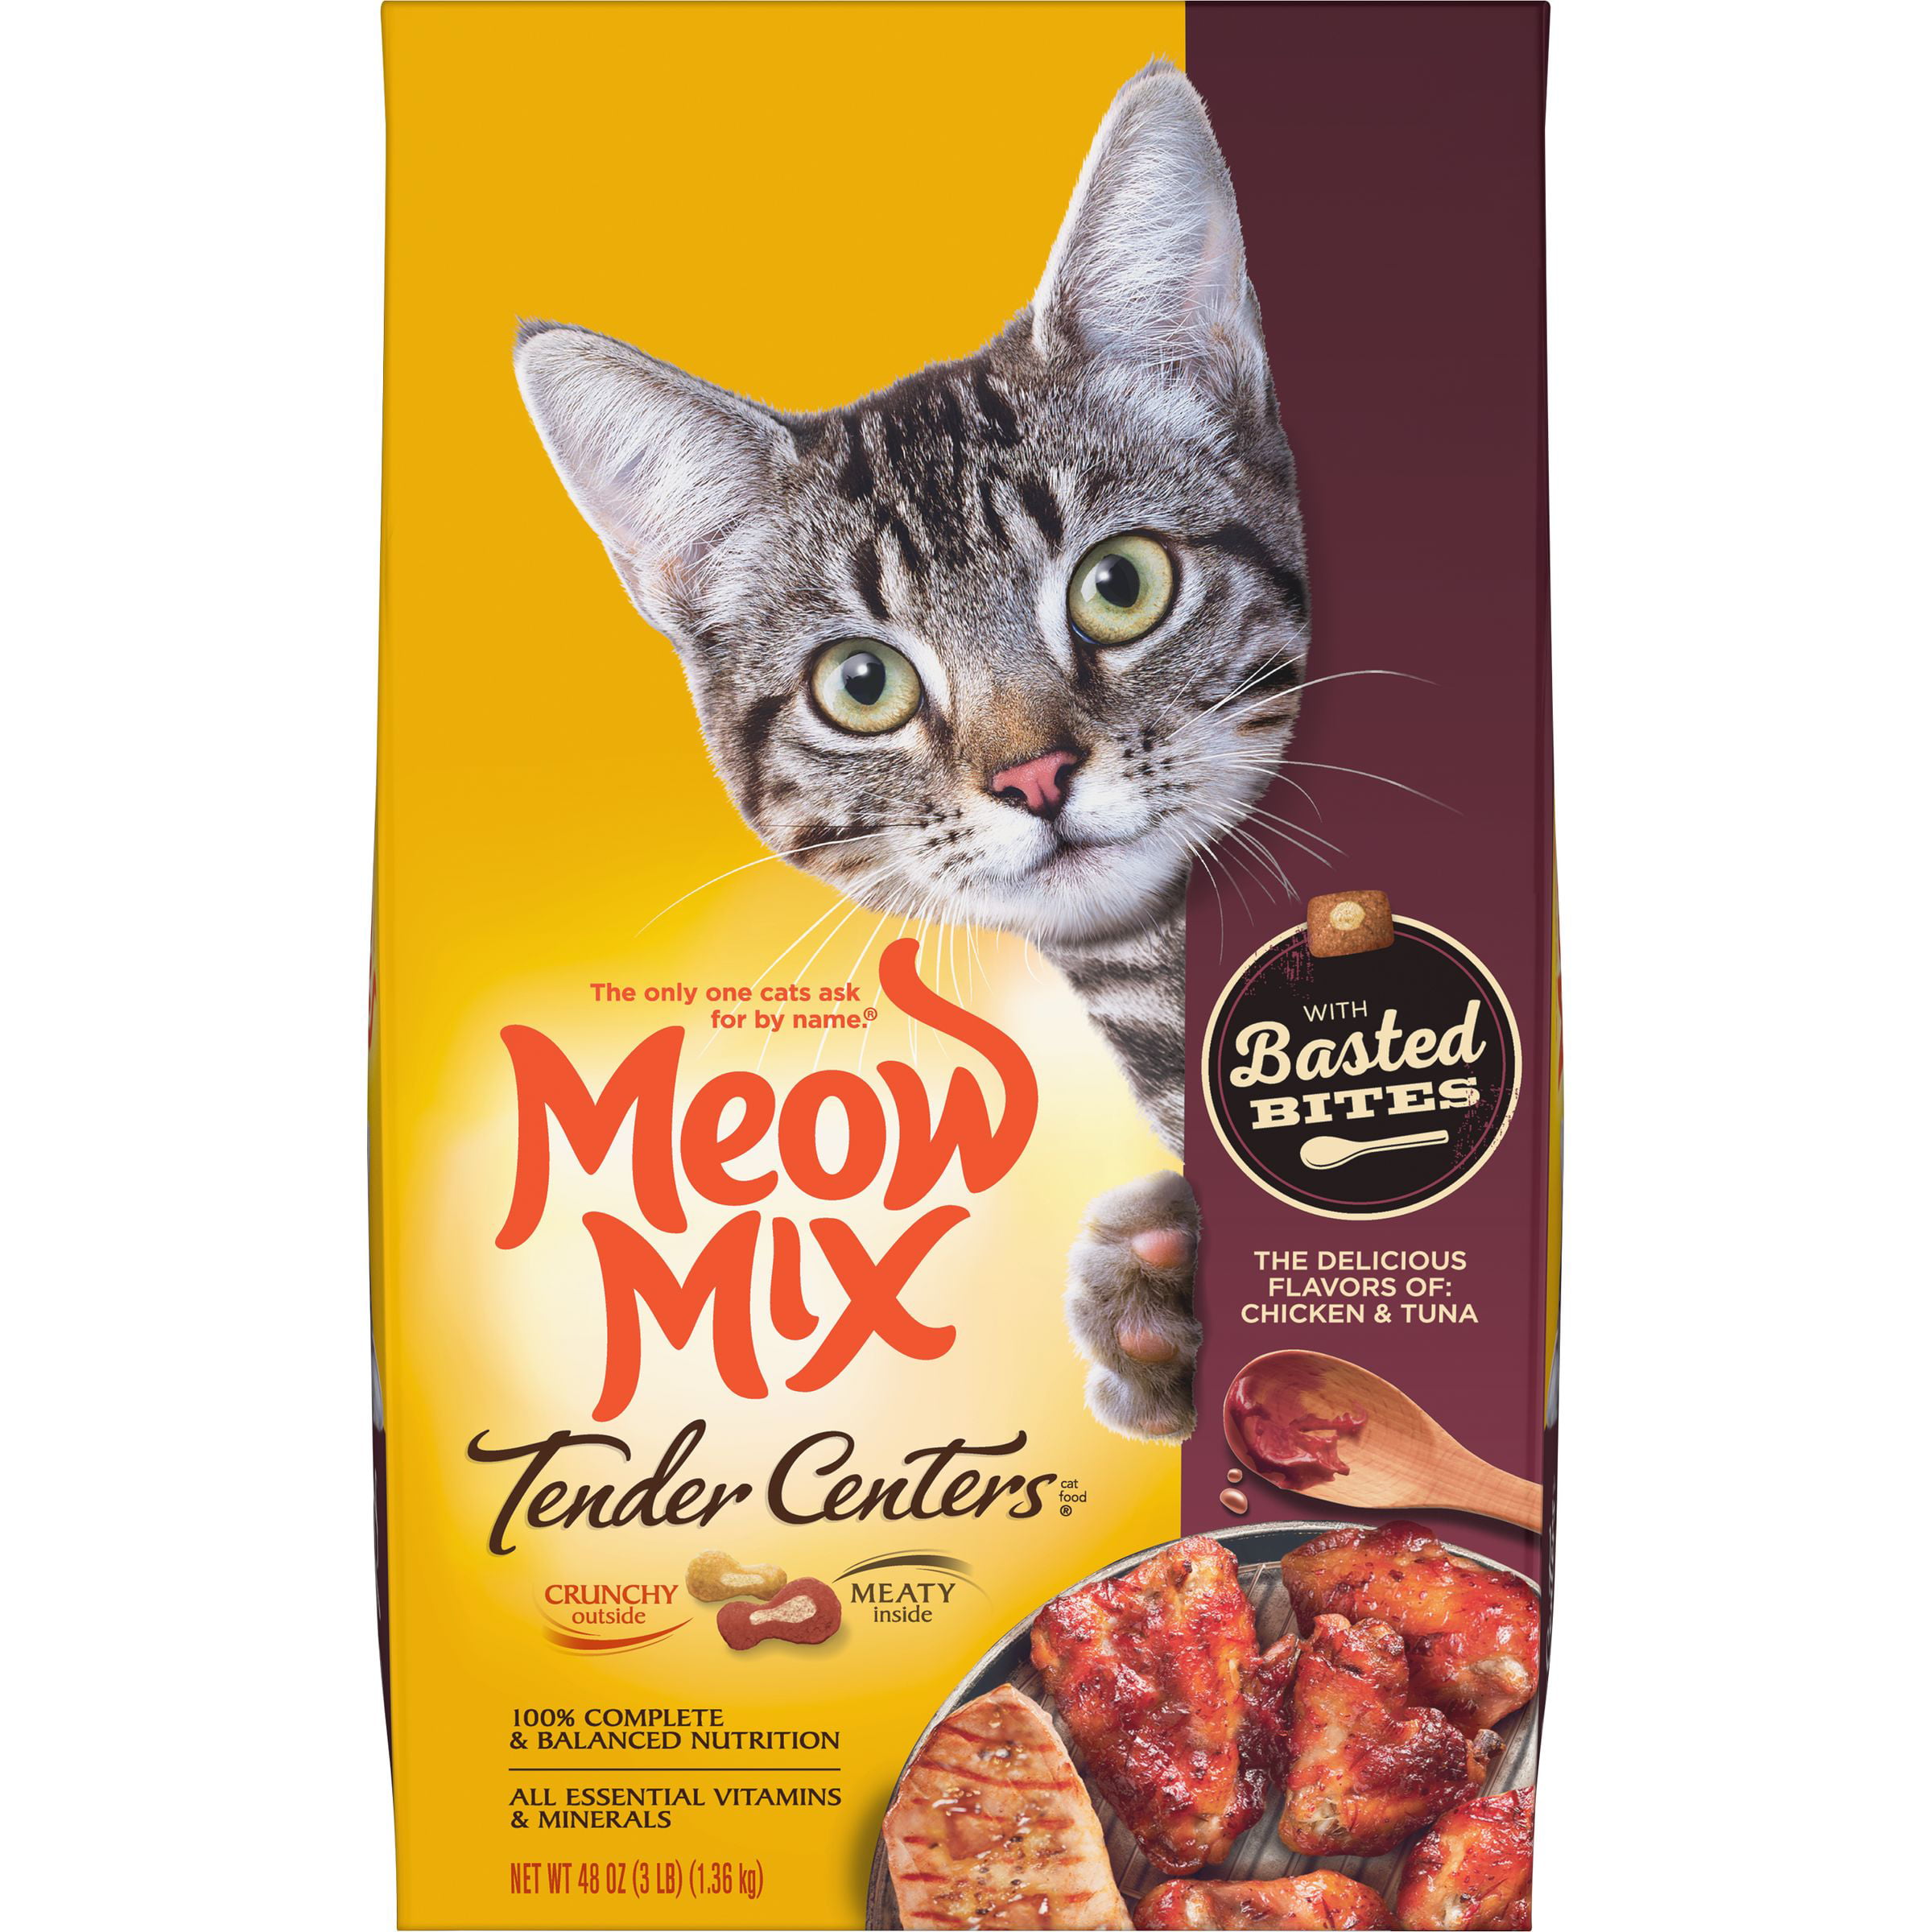 Meow Mix Tender Centers with Basted Bites, Chicken and Tuna Flavored